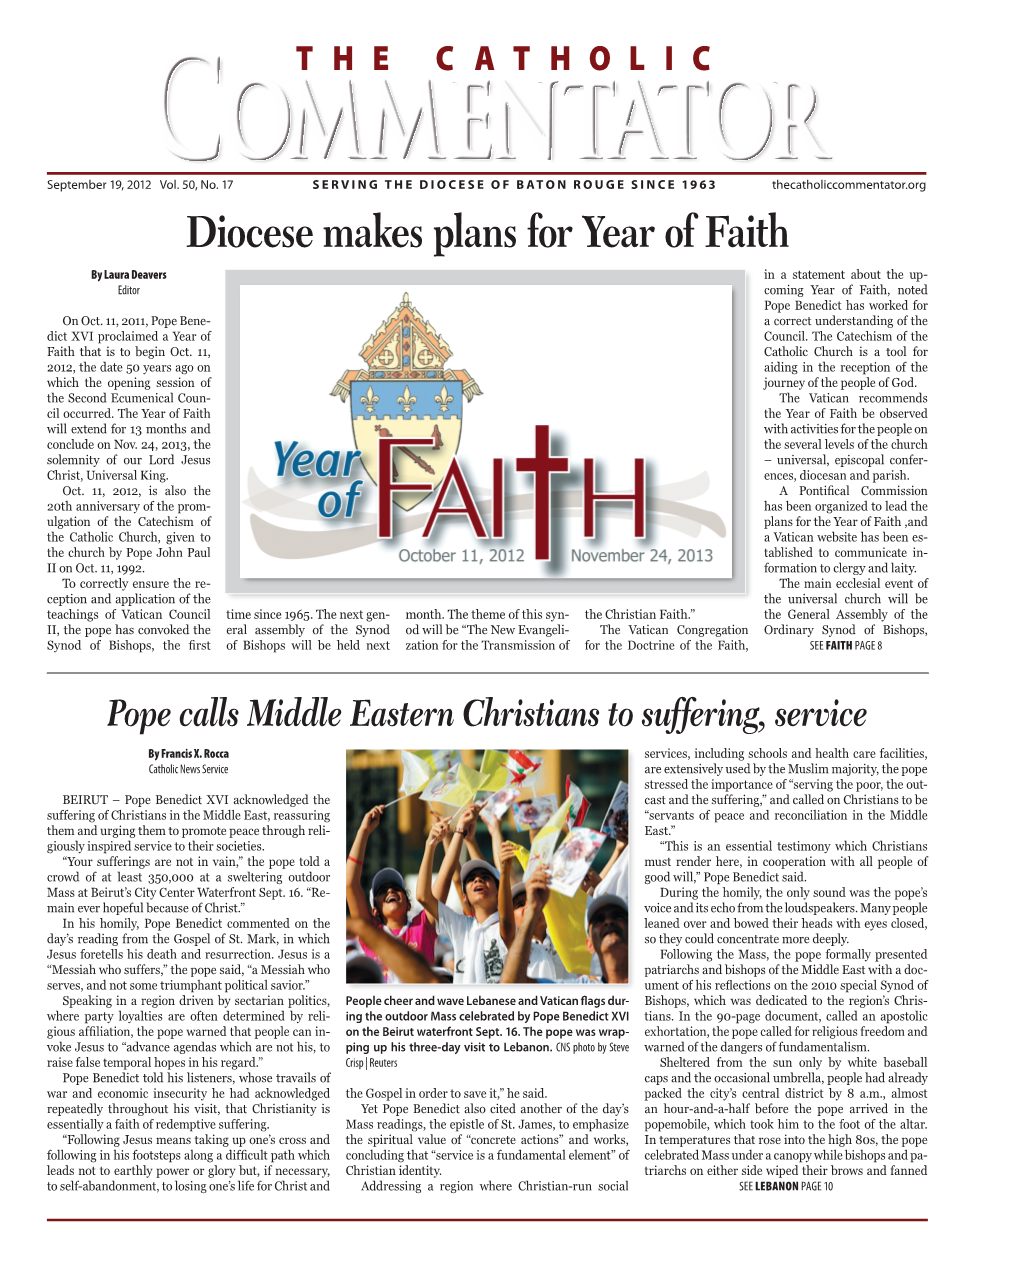 Diocese Makes Plans for Year of Faith by Laura Deavers in a Statement About the Up- Editor Coming Year of Faith, Noted Pope Benedict Has Worked for on Oct